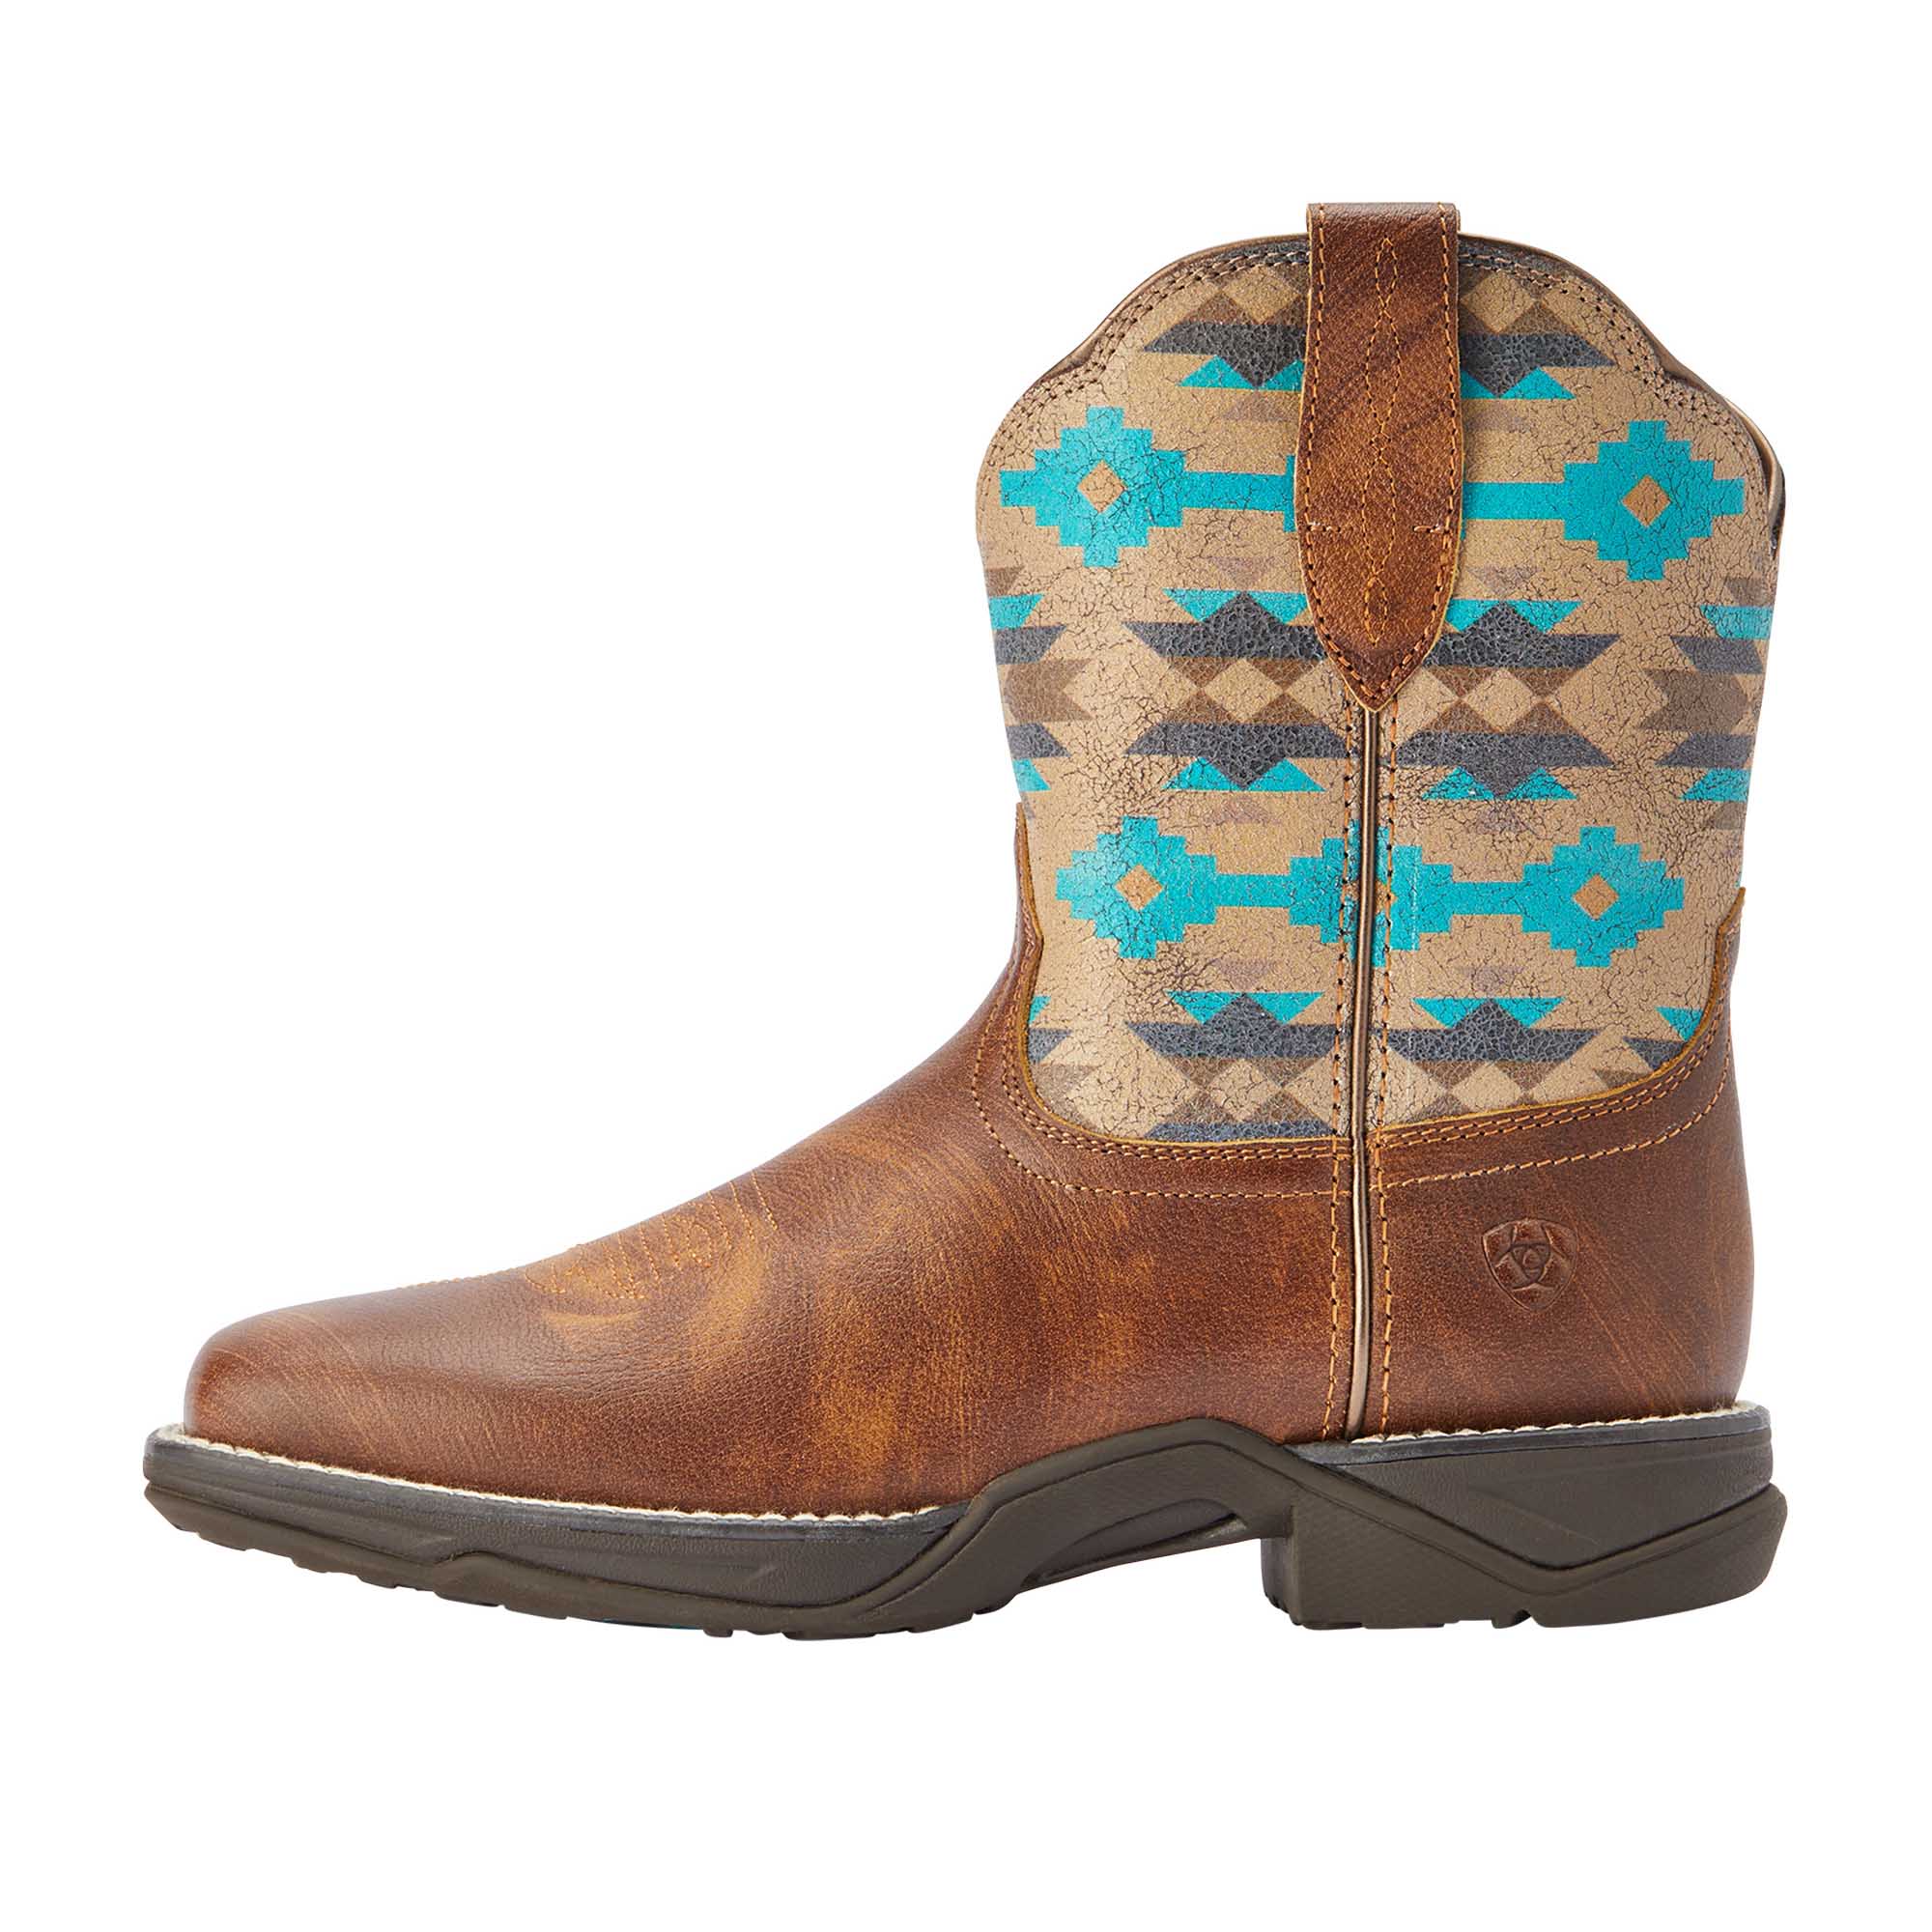 Ariat Womens Anthem Shortie Savannah Boot, Taupe and Turquoise